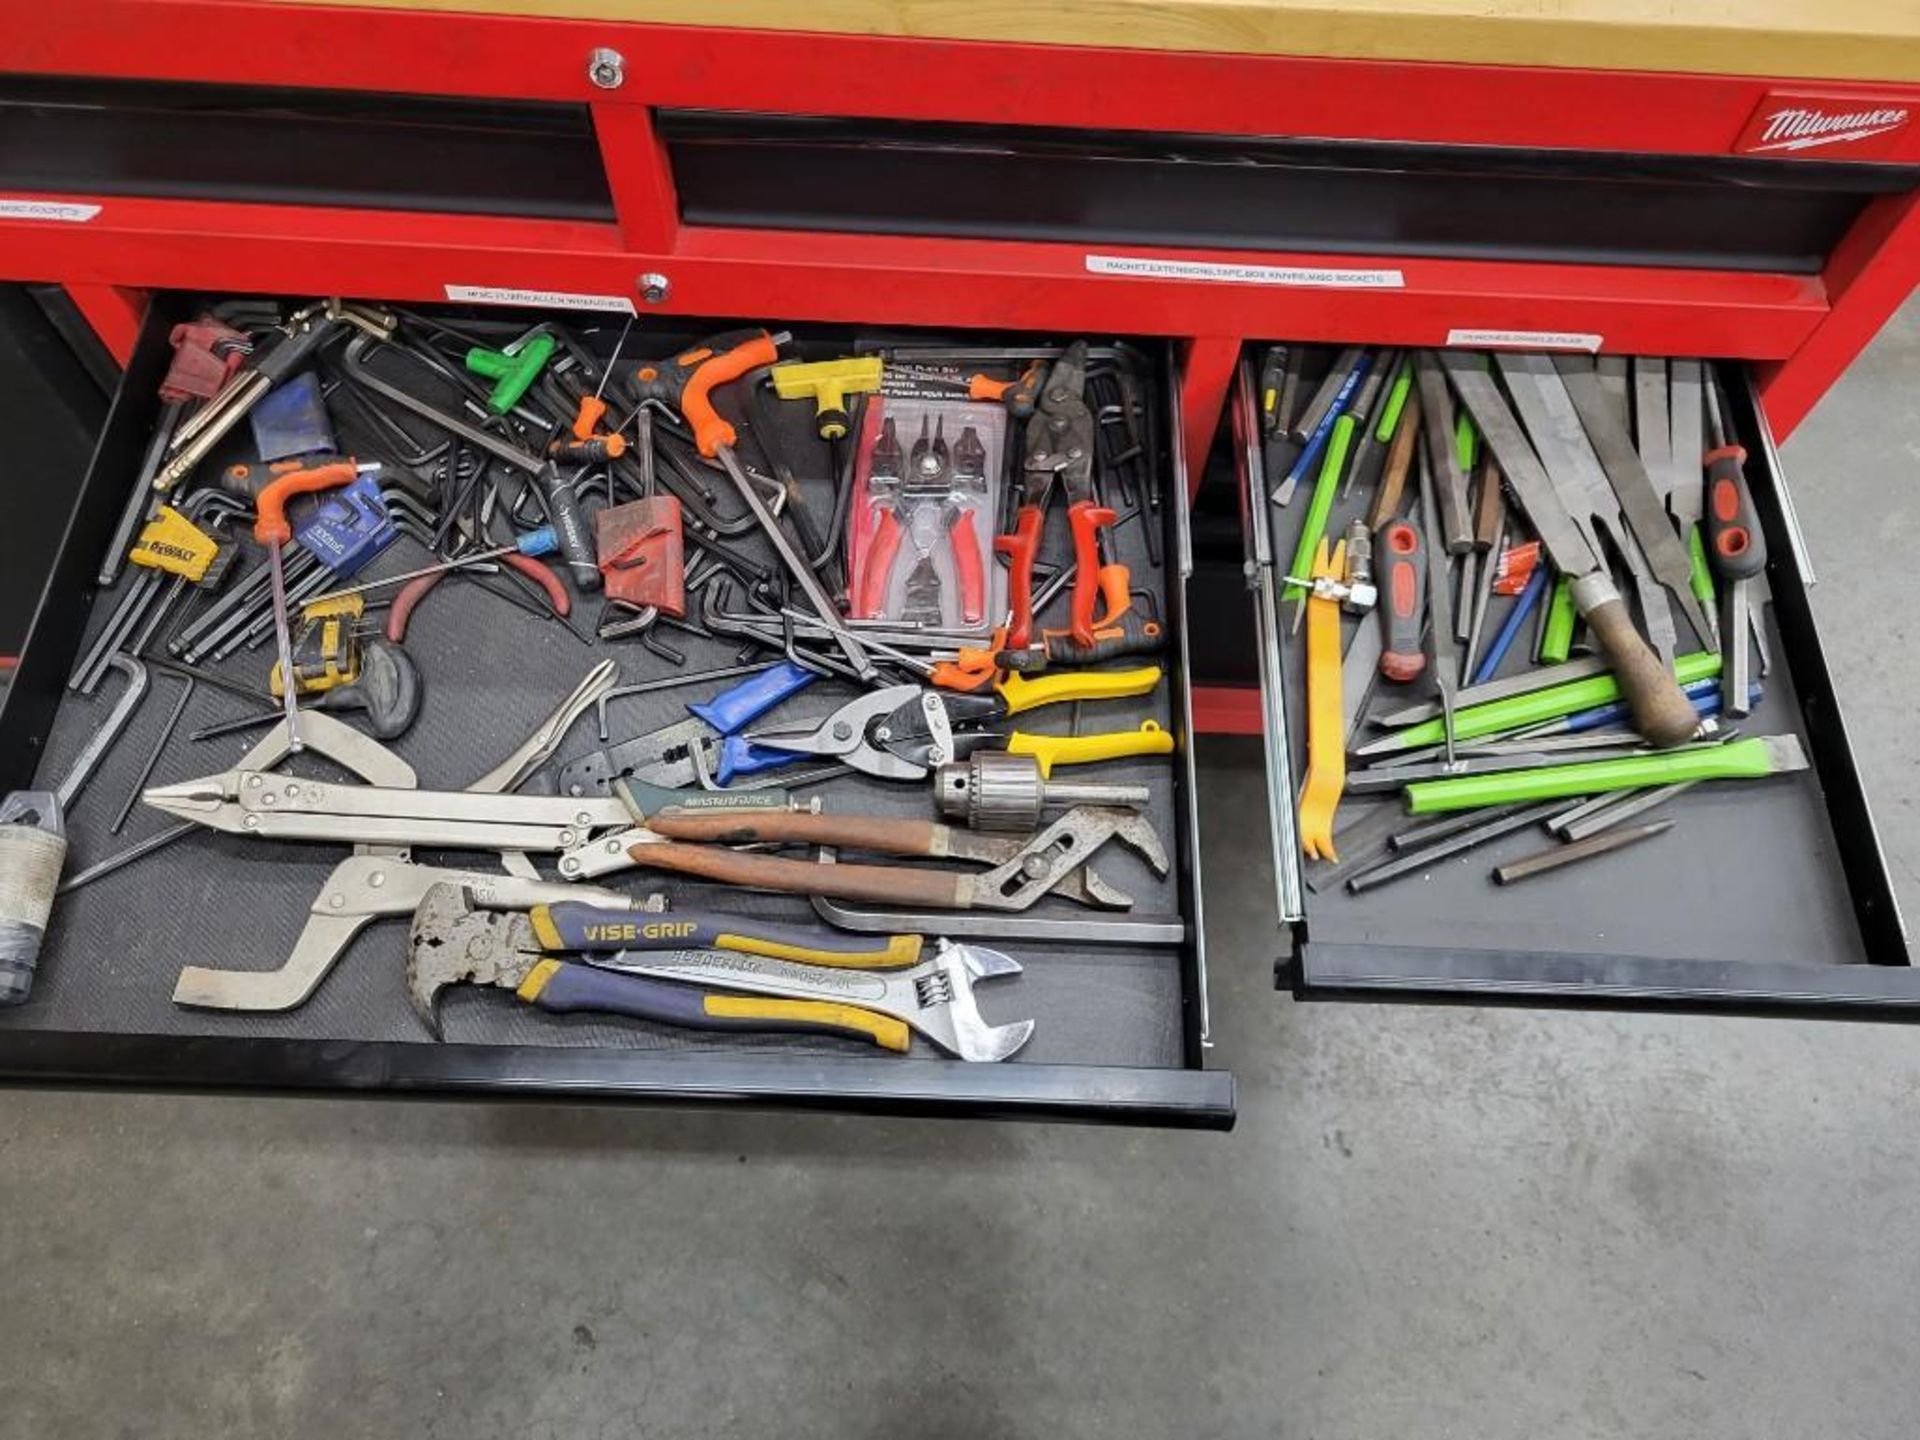 MILWAUKEE 60" MOBILE WORKBENCH LOADED WITH TOOLS - Image 10 of 18